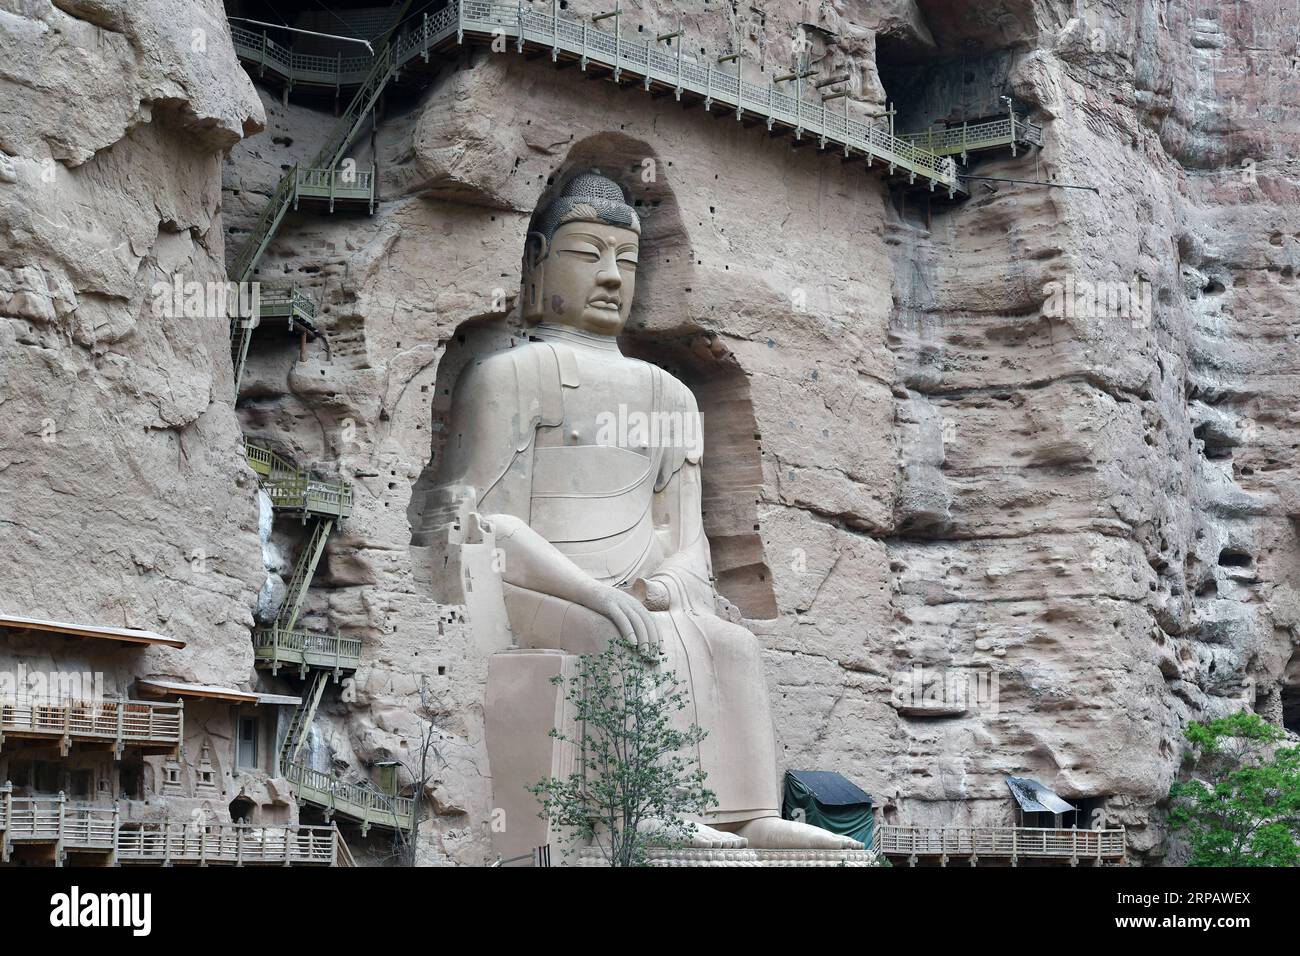 (190519) -- YONGJING, May 19, 2019 (Xinhua) -- A buddhist statue is shown in the photo taken on May 18, 2019 at Bingling Danxia National Geological Park in Yongjing County, northwest China s Gansu Province. Danxia landform is a unique type of landscapes formed from red sandstone and characterized by steep cliffs. (Xinhua/Fan Peishen) CHINA-GANSU-YONGJING-DANXIA LANDFORM (CN) PUBLICATIONxNOTxINxCHN Stock Photo